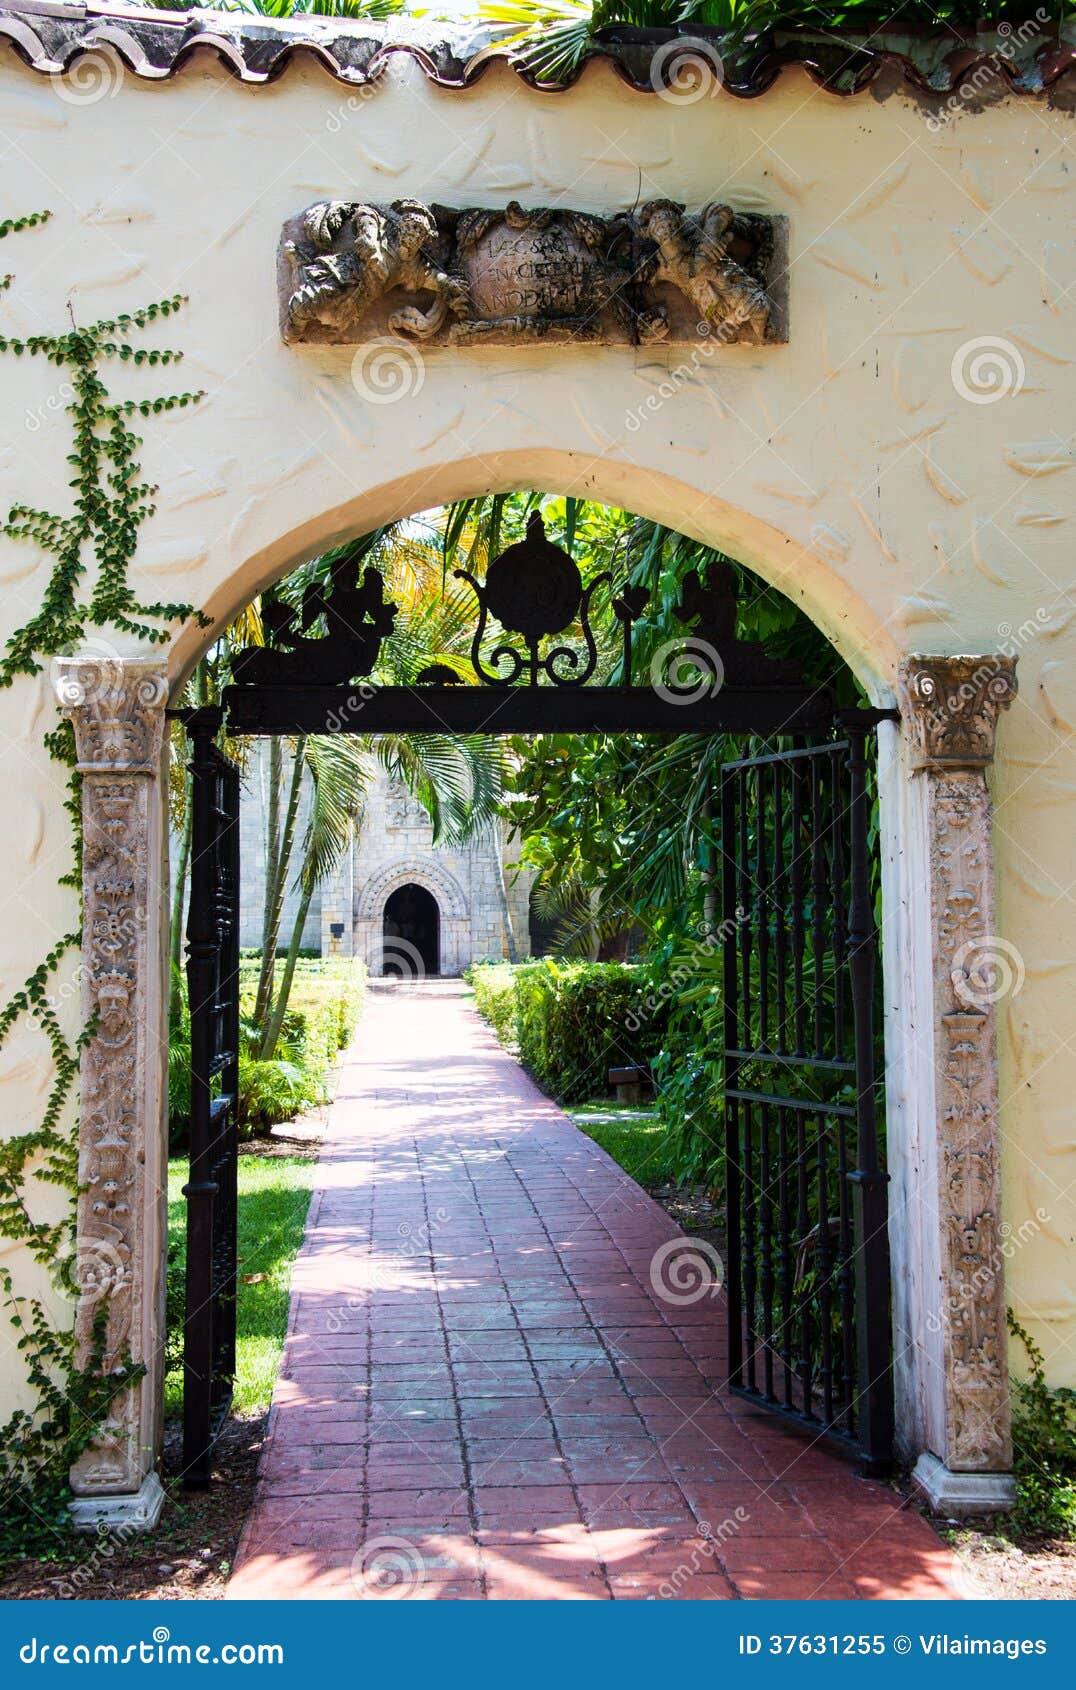 Arched entrance stock image. Image of ancient, convent - 37631255